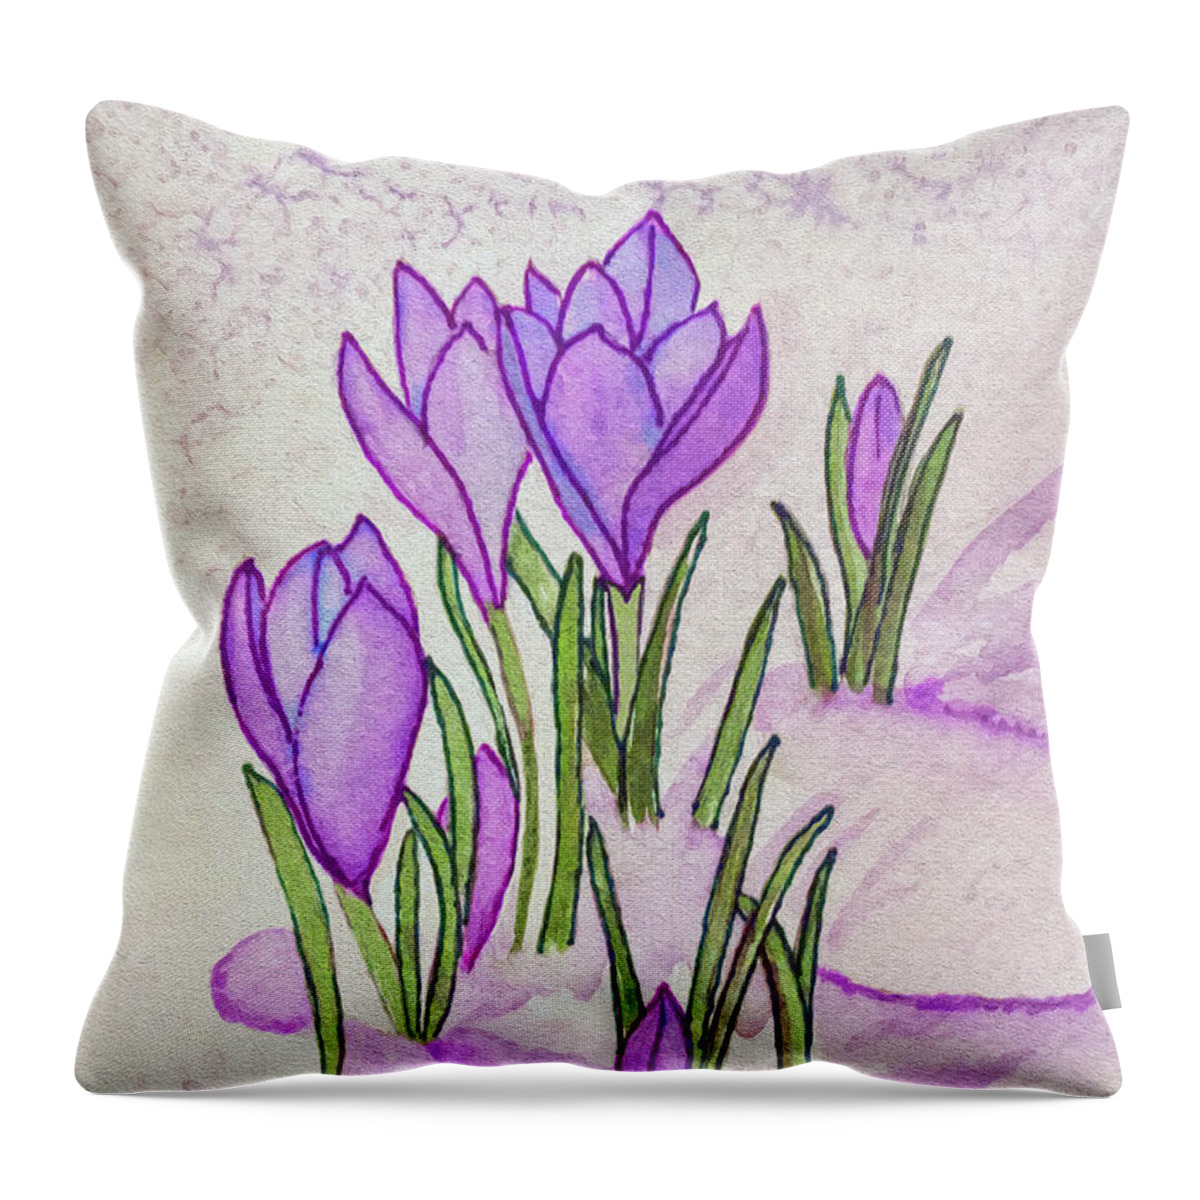 Crocus Throw Pillow featuring the painting Crocus In The Snow by Deborah League